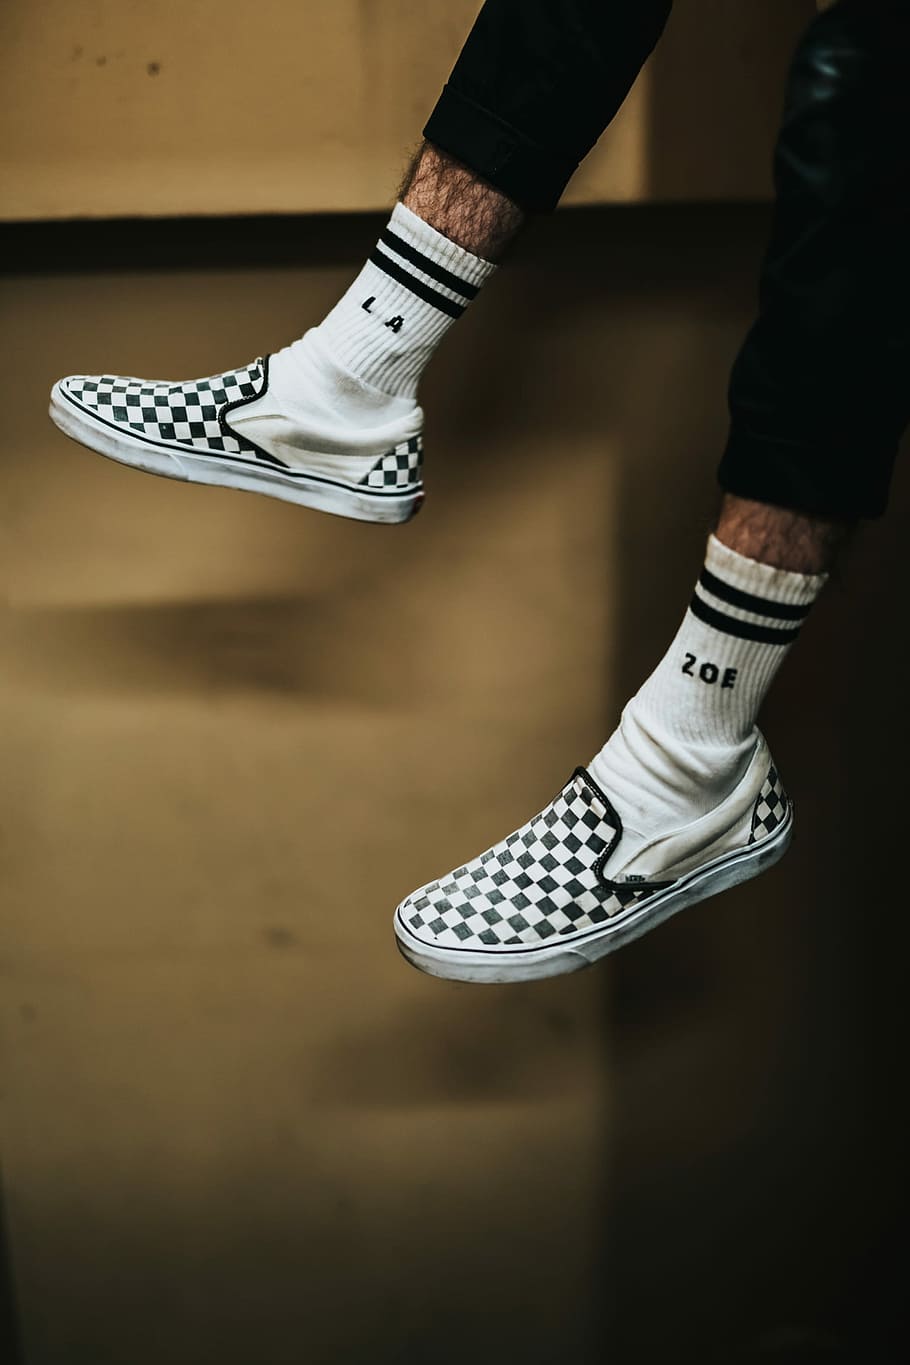 HD wallpaper: person wearing white-and-black checked slip-on shoes, person  wearing pair of white-and-black Vans low-top sneakers | Wallpaper Flare